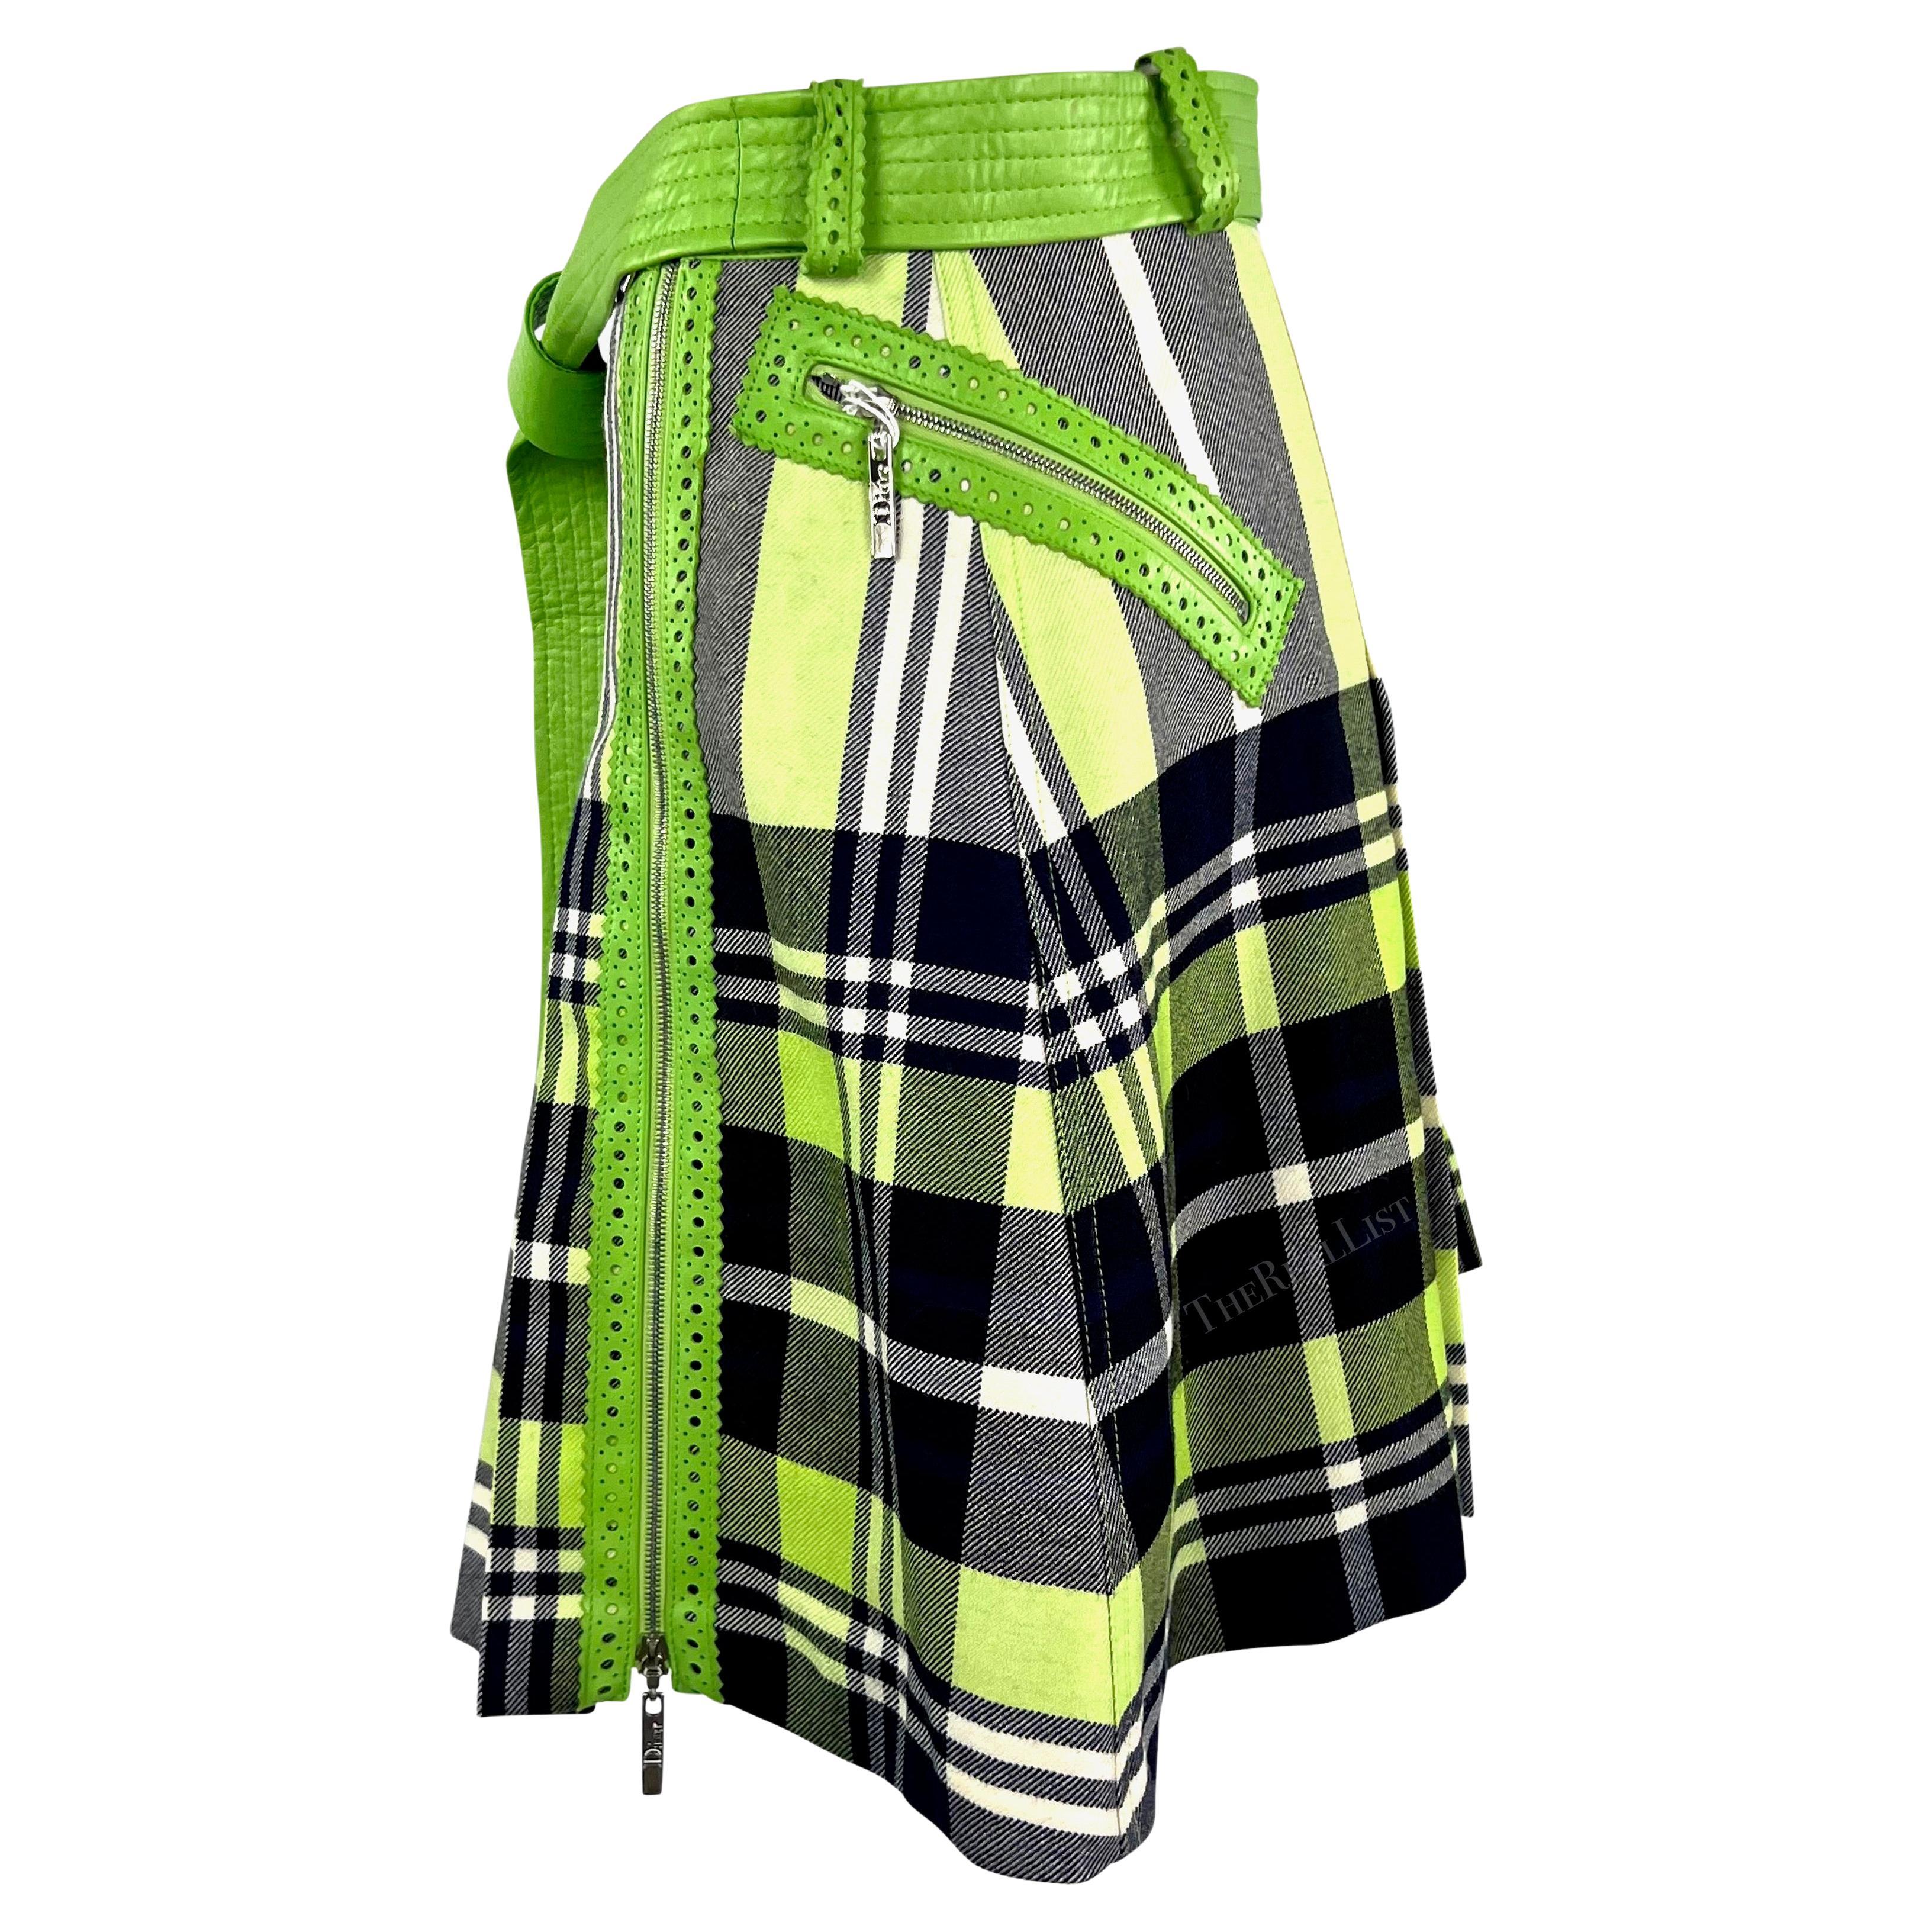  NWT F/W 2004 Christian Dior by John Galliano Green Plaid Pleated Mini Skirt In Excellent Condition For Sale In West Hollywood, CA